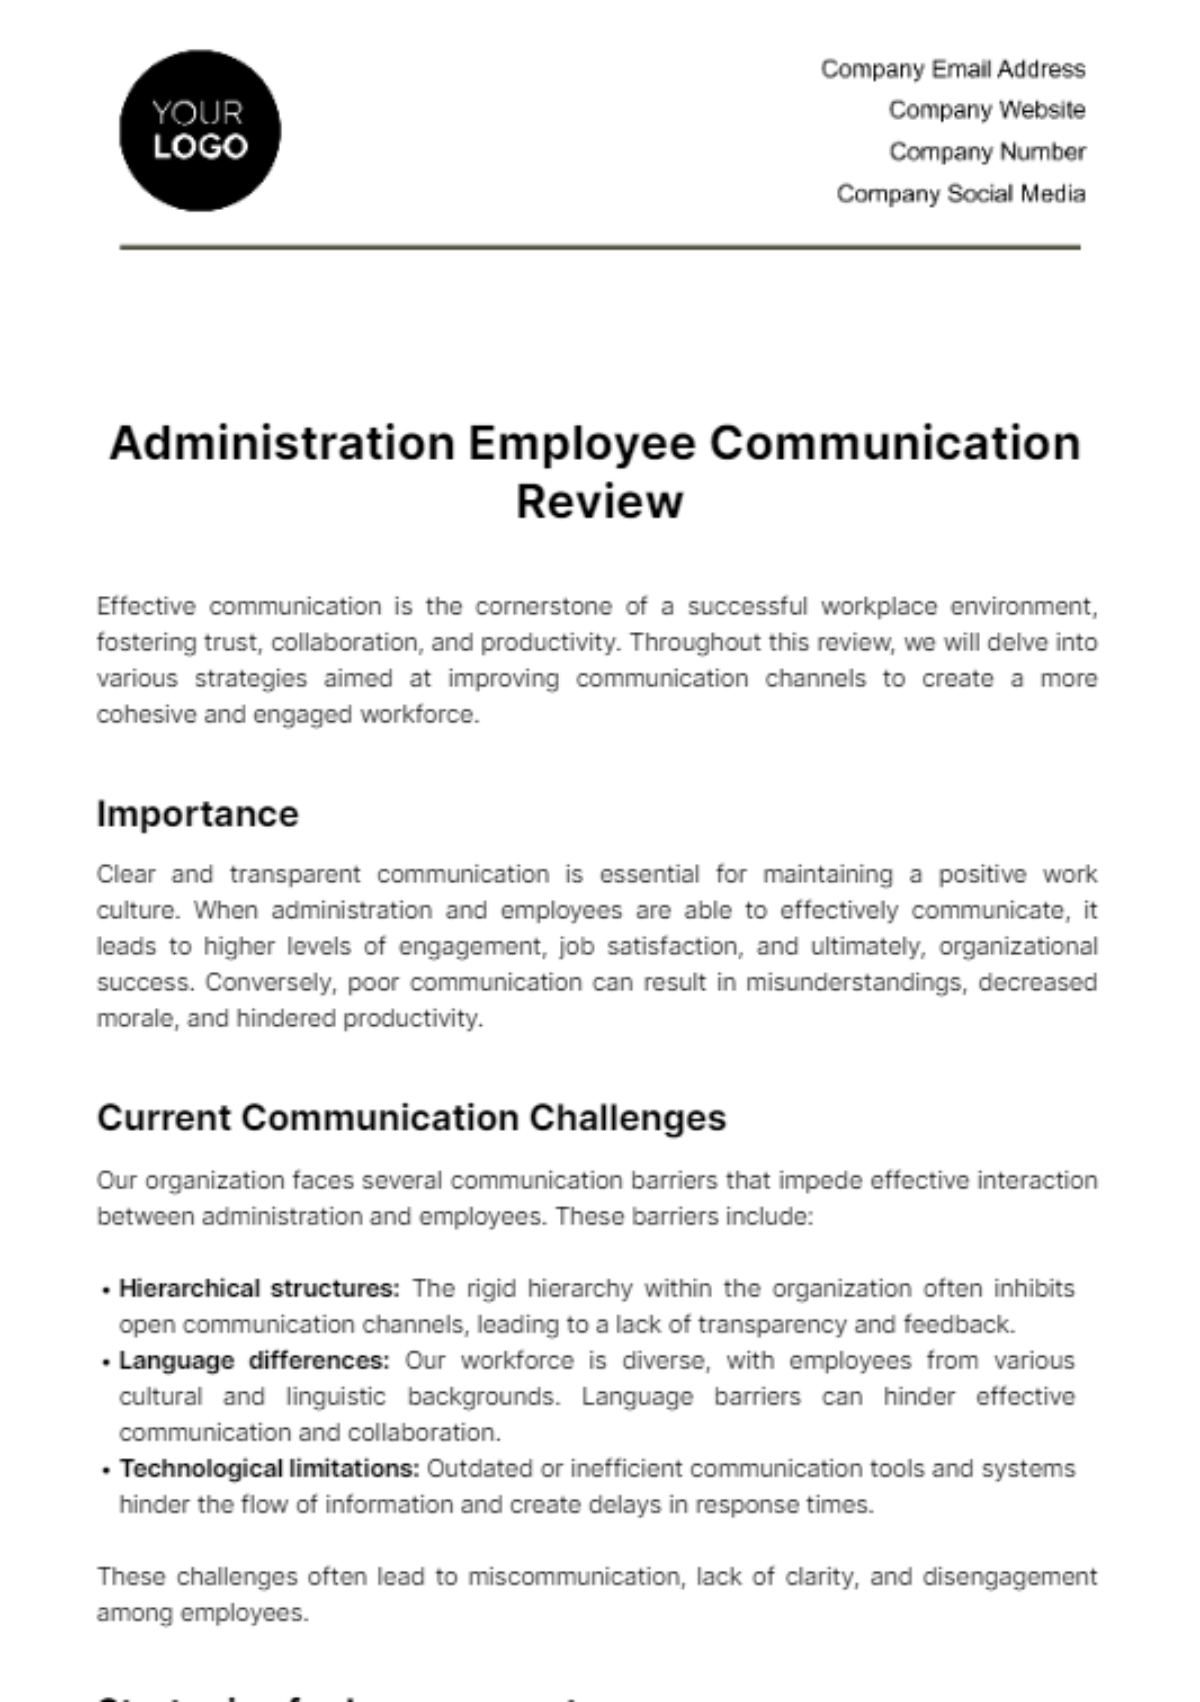 Free Administration Employee Communication Review Template